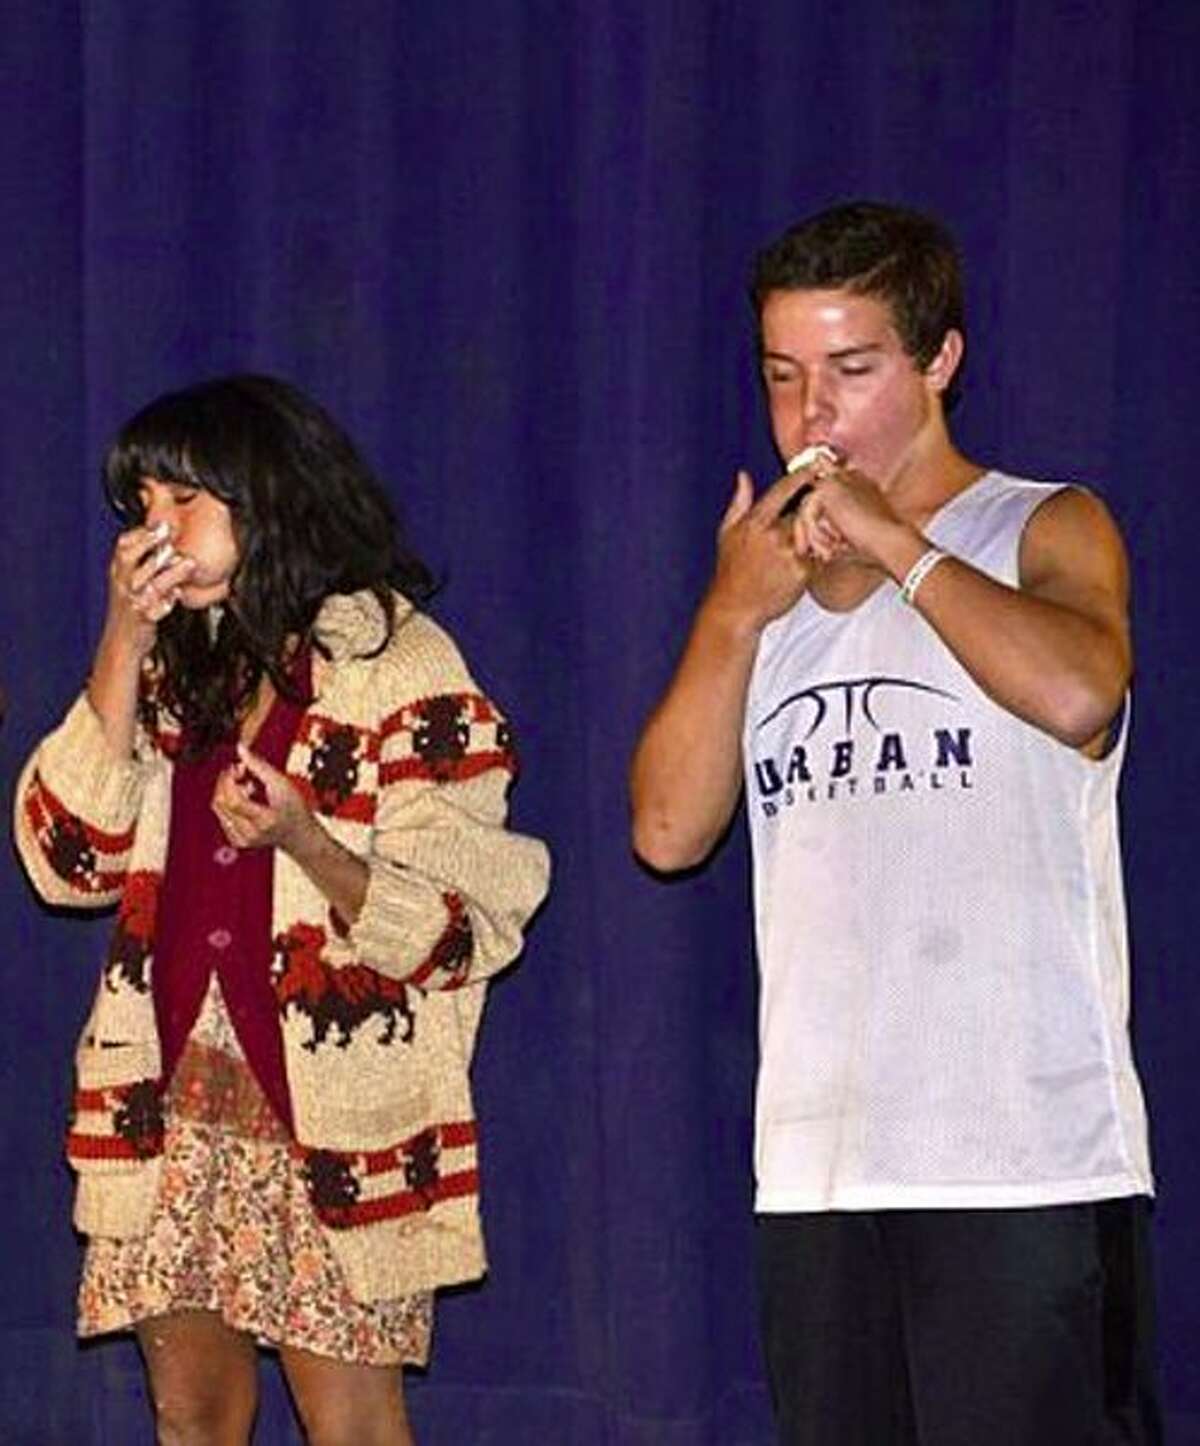 Chubby Bunny eating competition